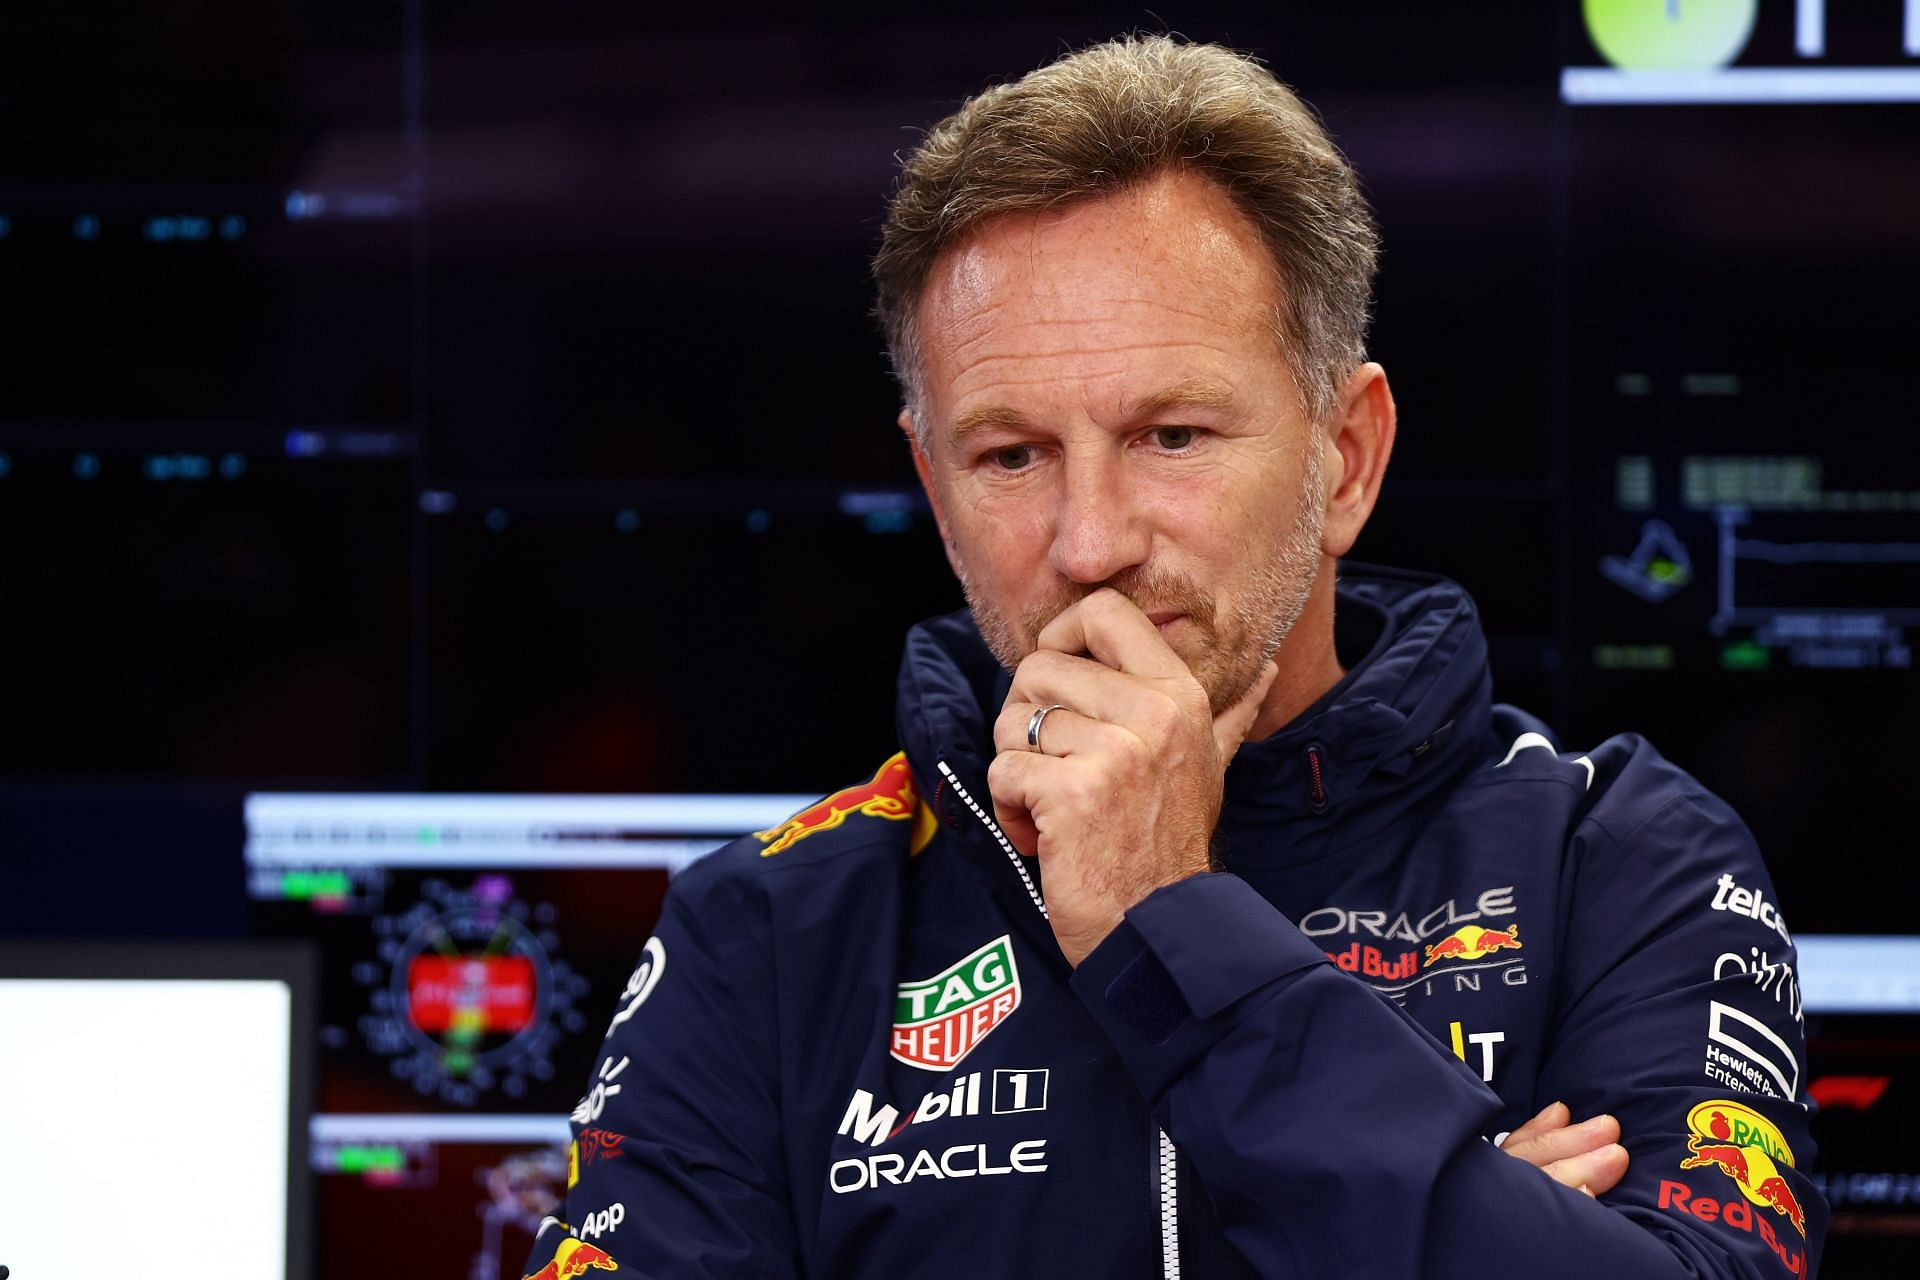 Red Bull Racing Team Principal Christian Horner looks on in the garage ahead of the F1 Grand Prix of Hungary at Hungaroring on July 31, 2022 in Budapest, Hungary. (Photo by Mark Thompson/Getty Images)